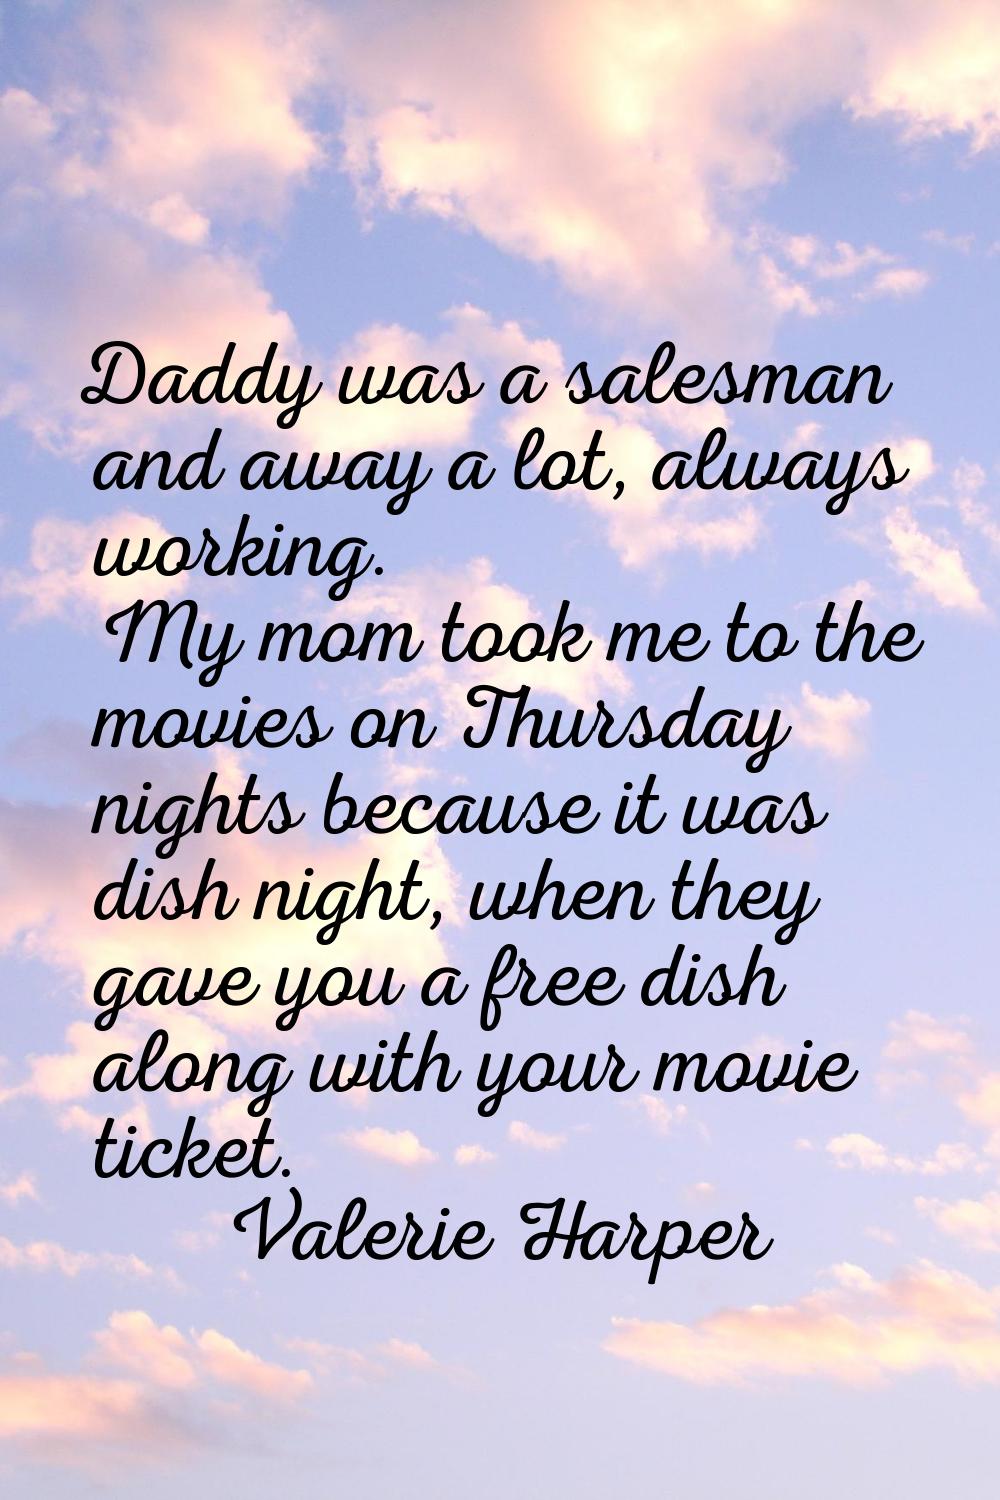 Daddy was a salesman and away a lot, always working. My mom took me to the movies on Thursday night